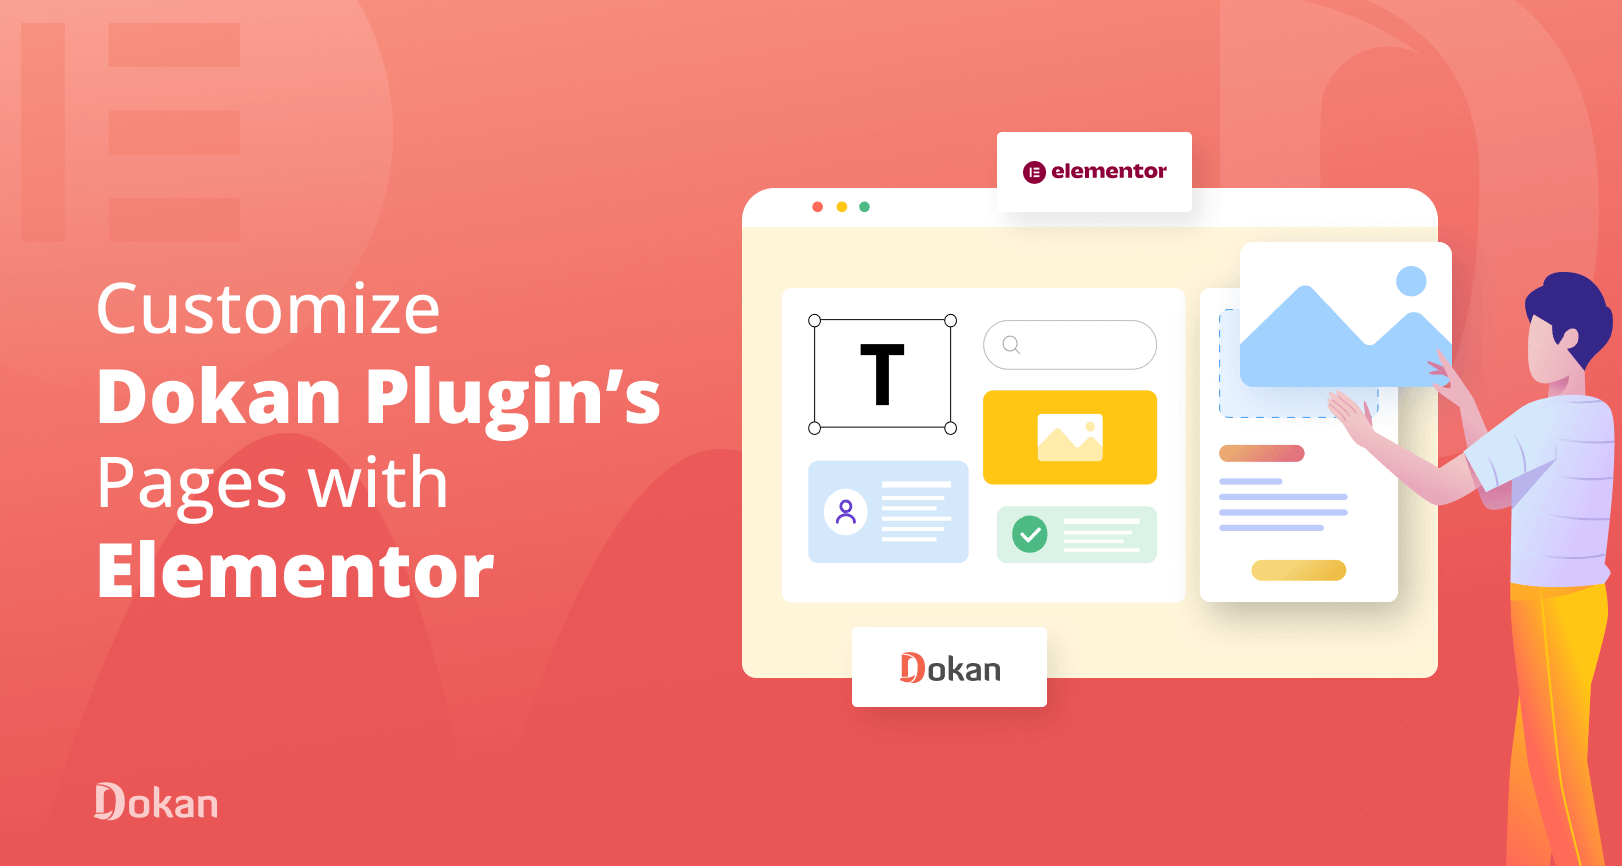 How Can I Customize Dokan Plugin’s Pages with Elementor